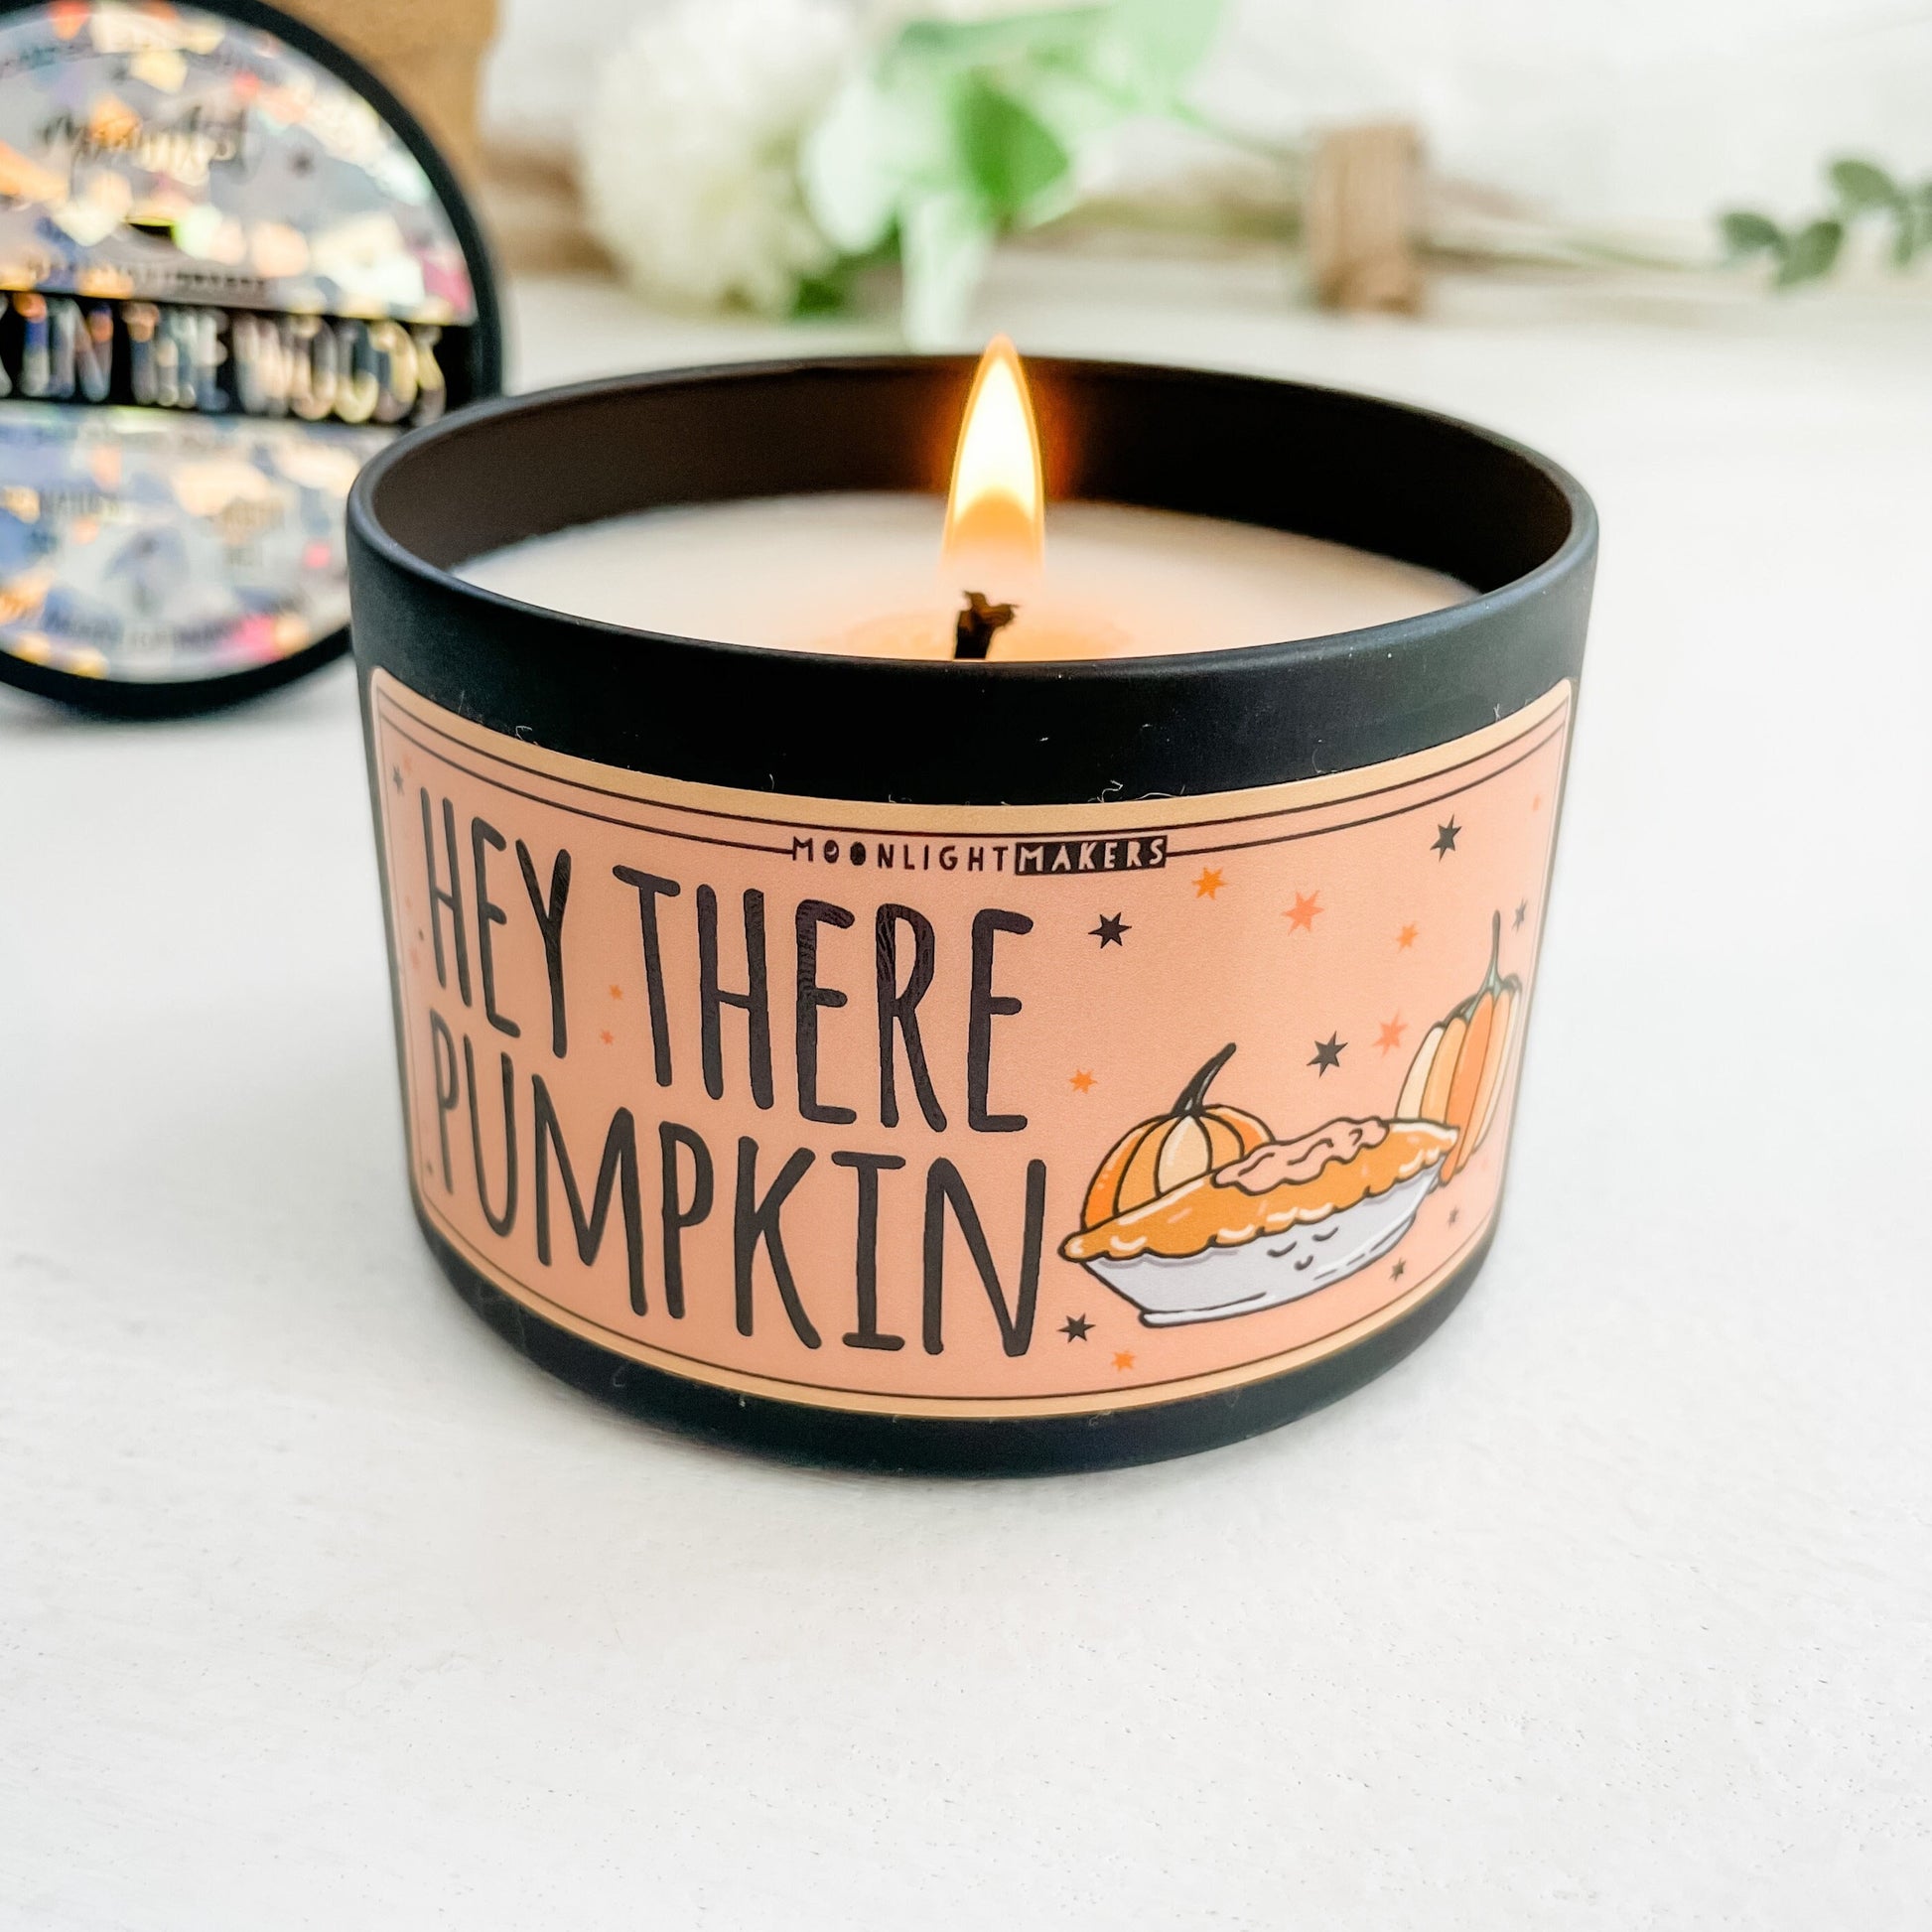  Pumpkin Spice Scented Holiday Candle, Soy Wax Candles